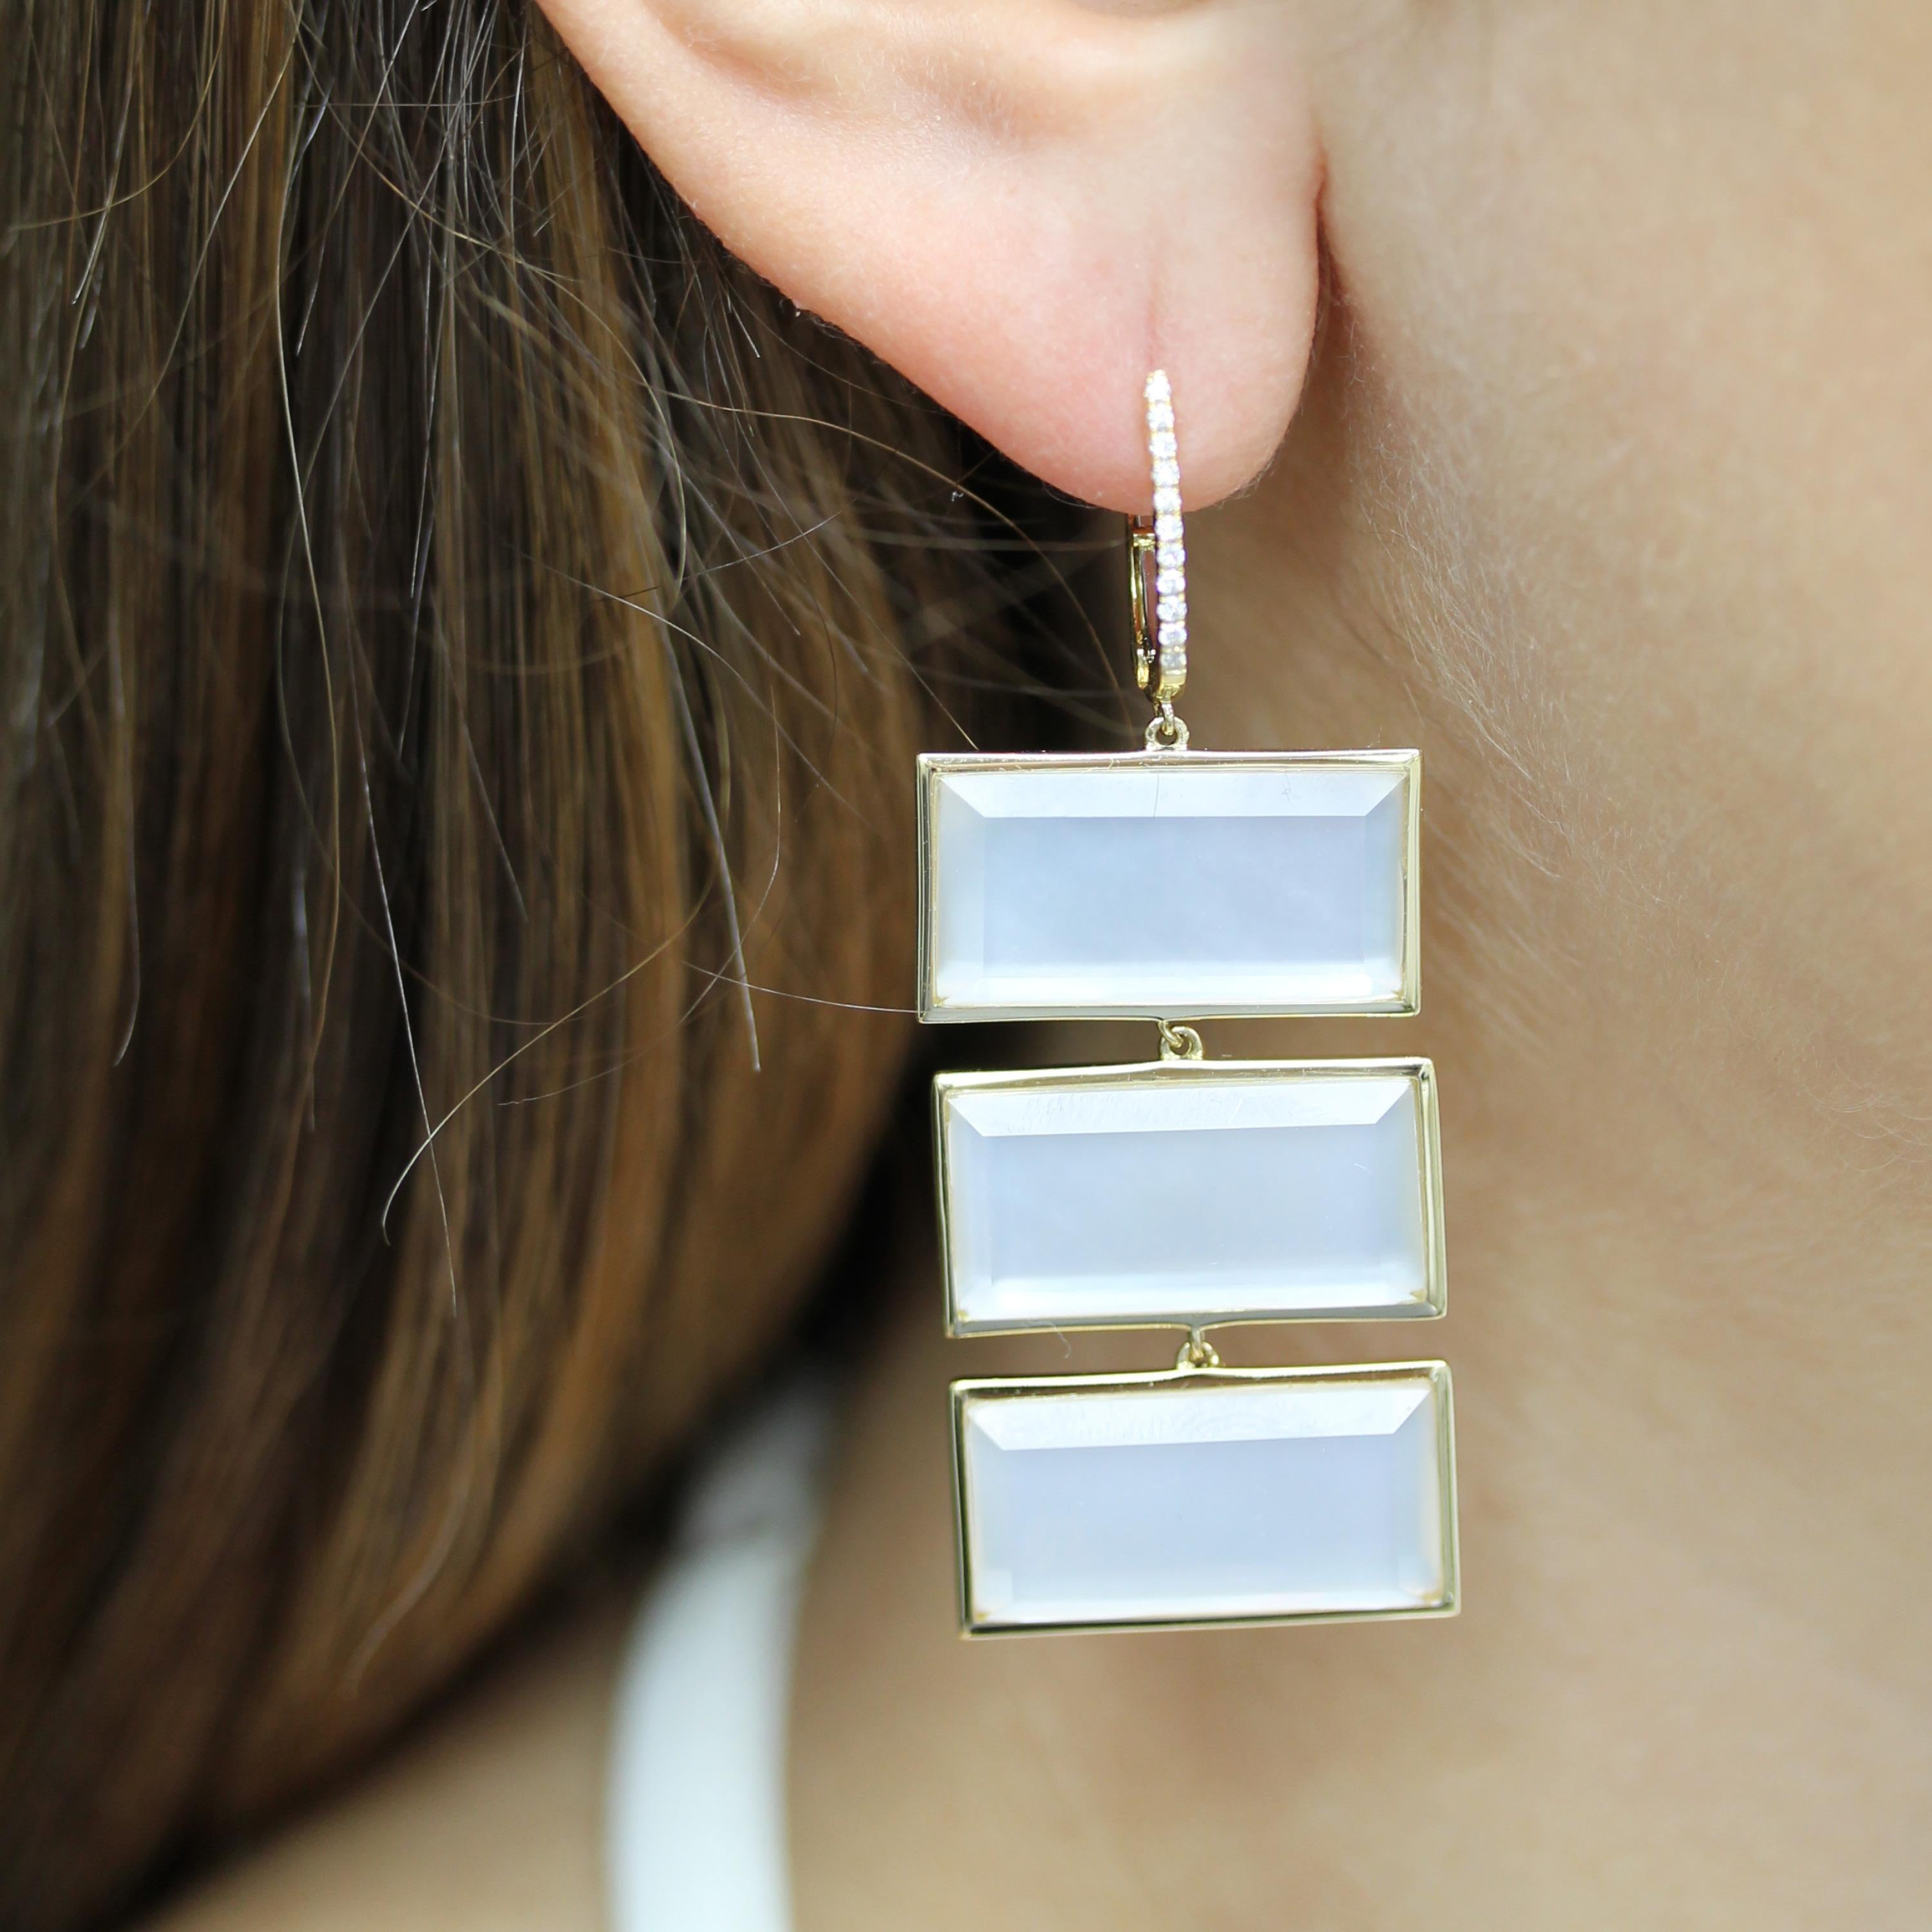 White Orchid Collection Earrings, with (3) Rectangular White Mother of Pearl and White Quartz Doublets, and gold diamond huggie-tops, in 18K yellow gold. White mother of pearl comes from the inner lining of oyster shells, and is believed to promote